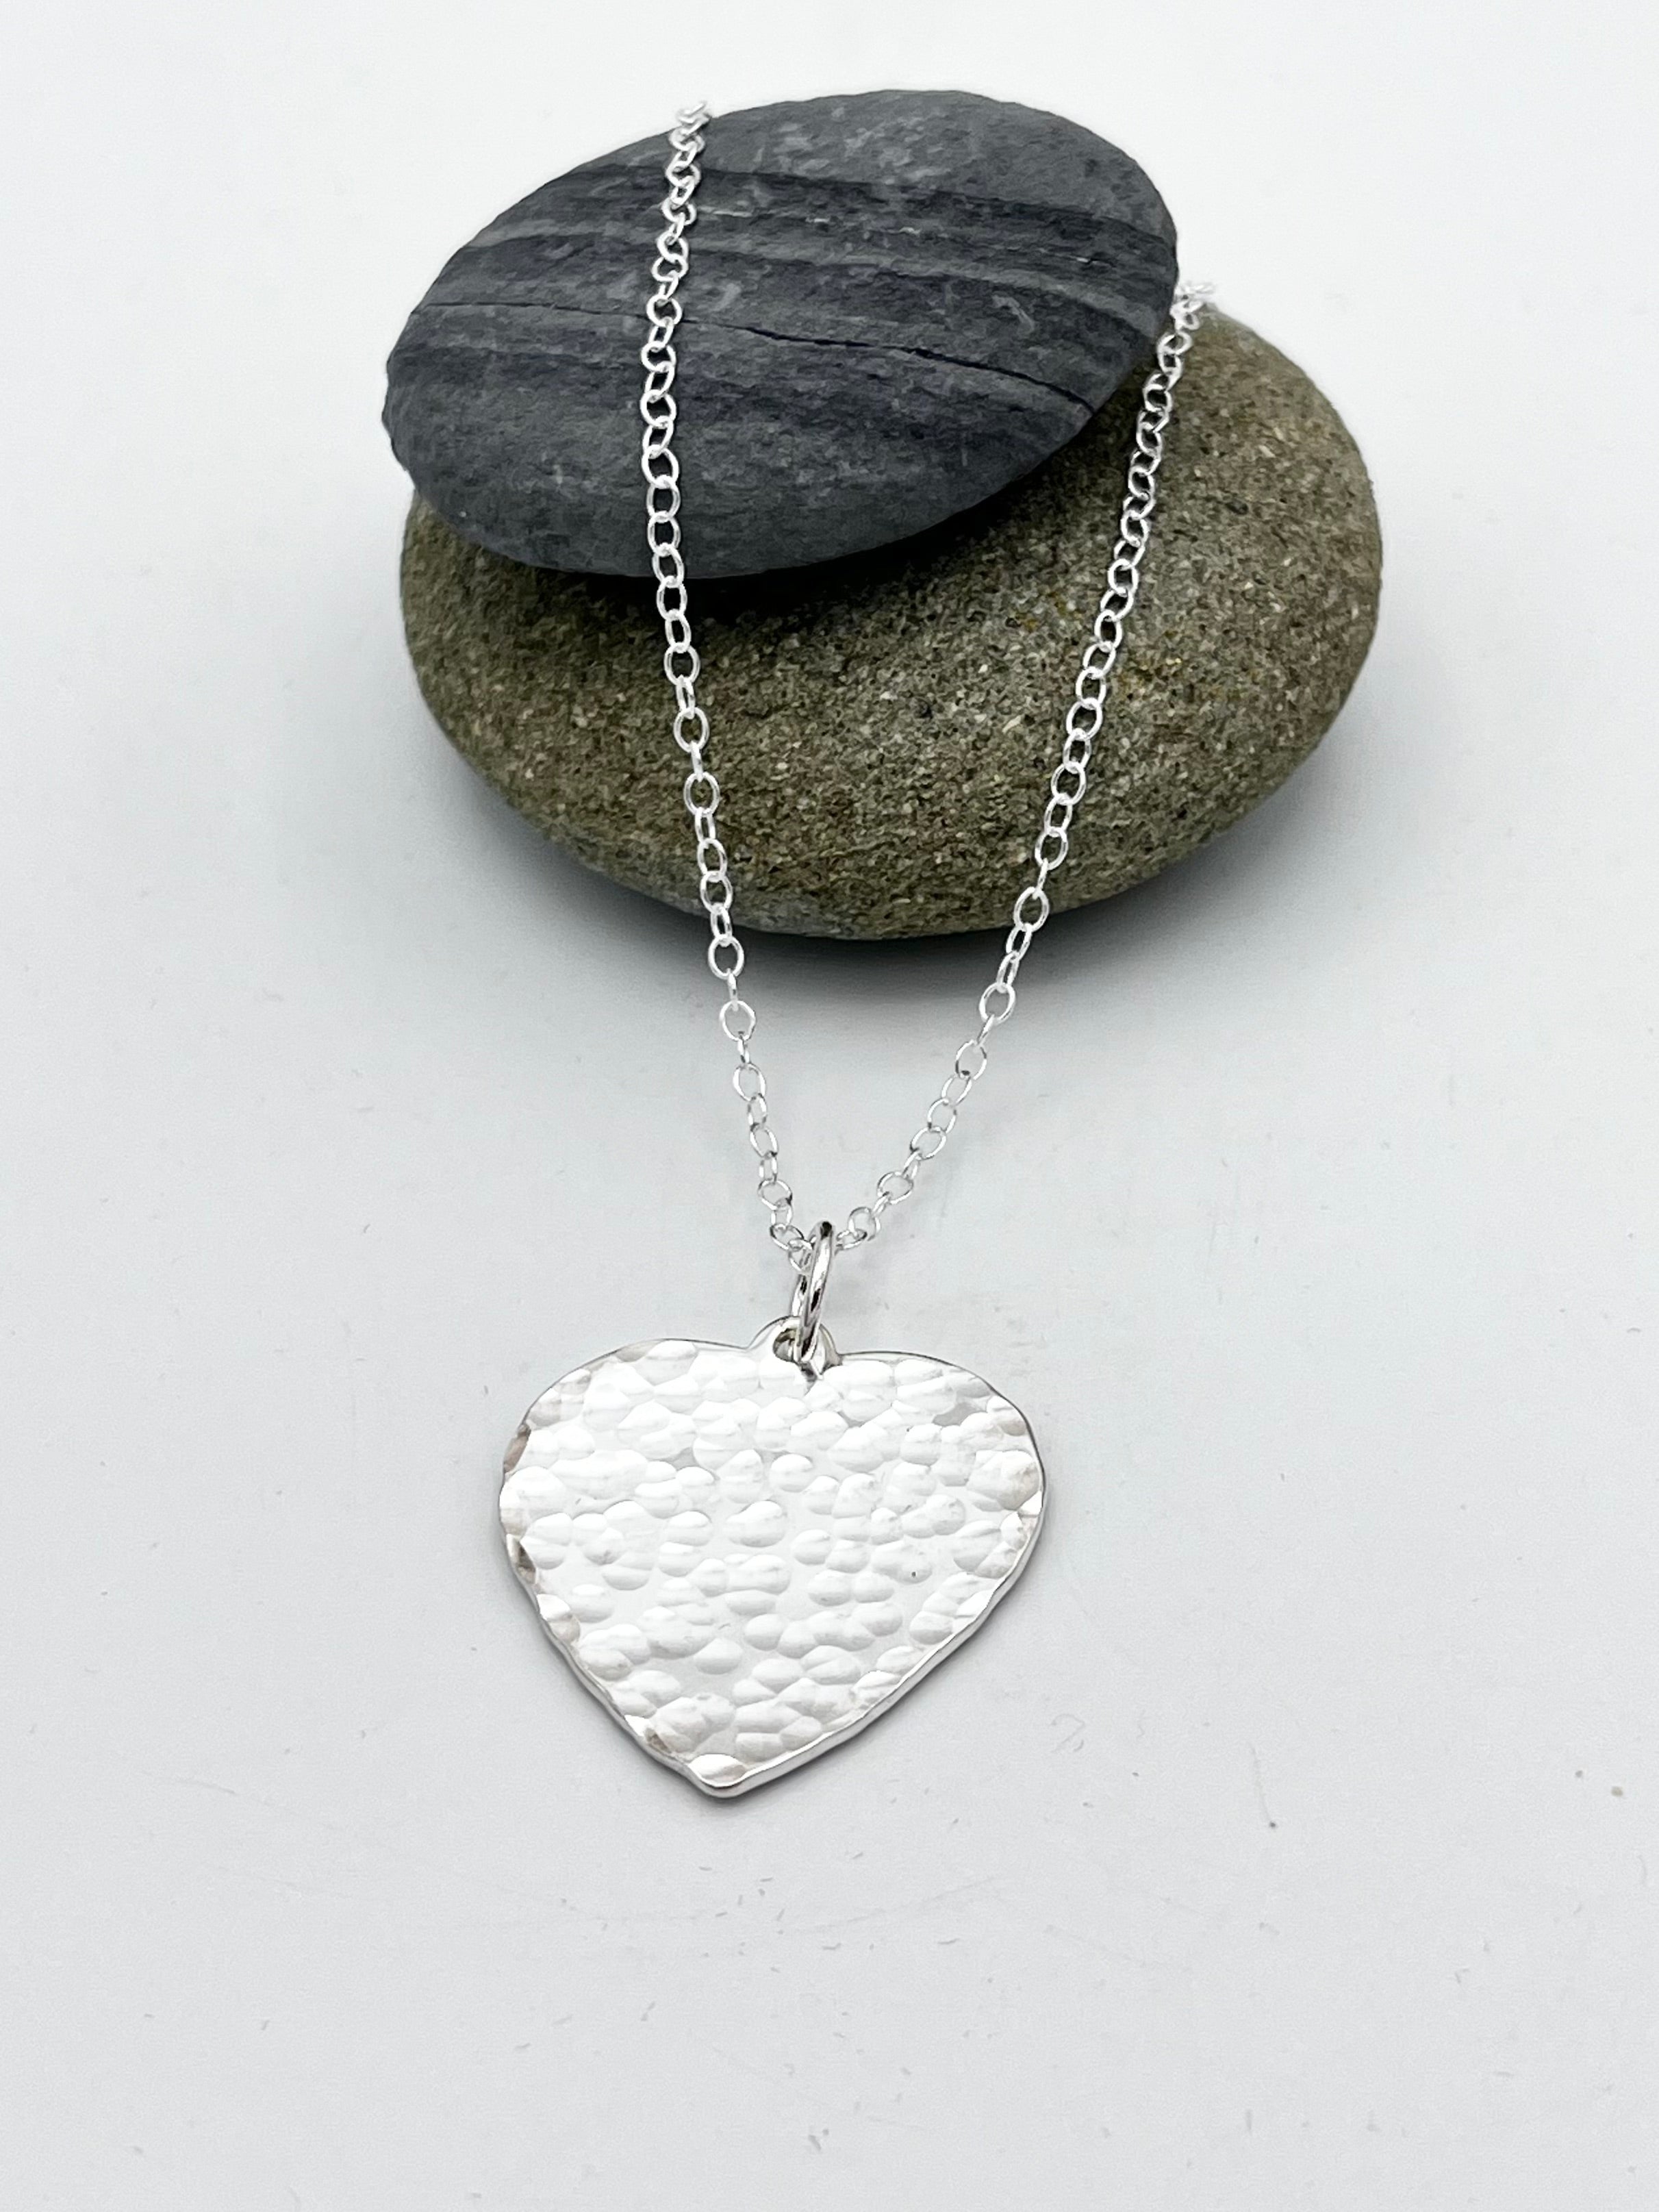 Single heart pendant 25mm wide hammered finish